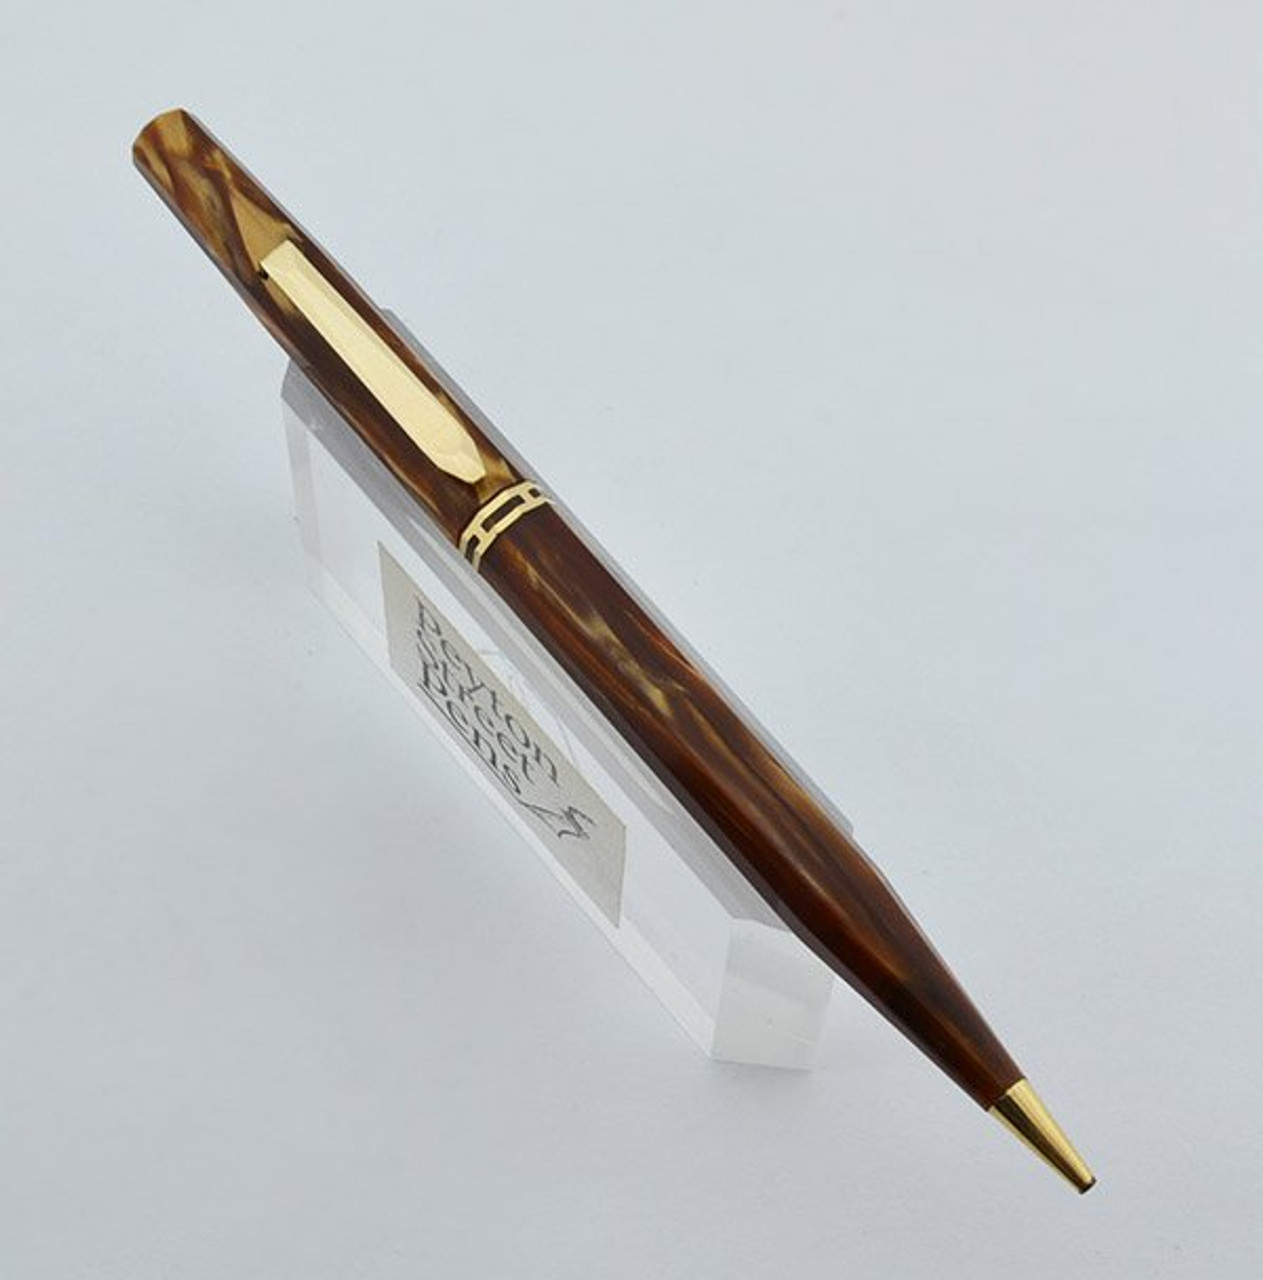 Wahl Doric Mechanical Pencil - Topaz, Large Size (Excellent, Works Well)